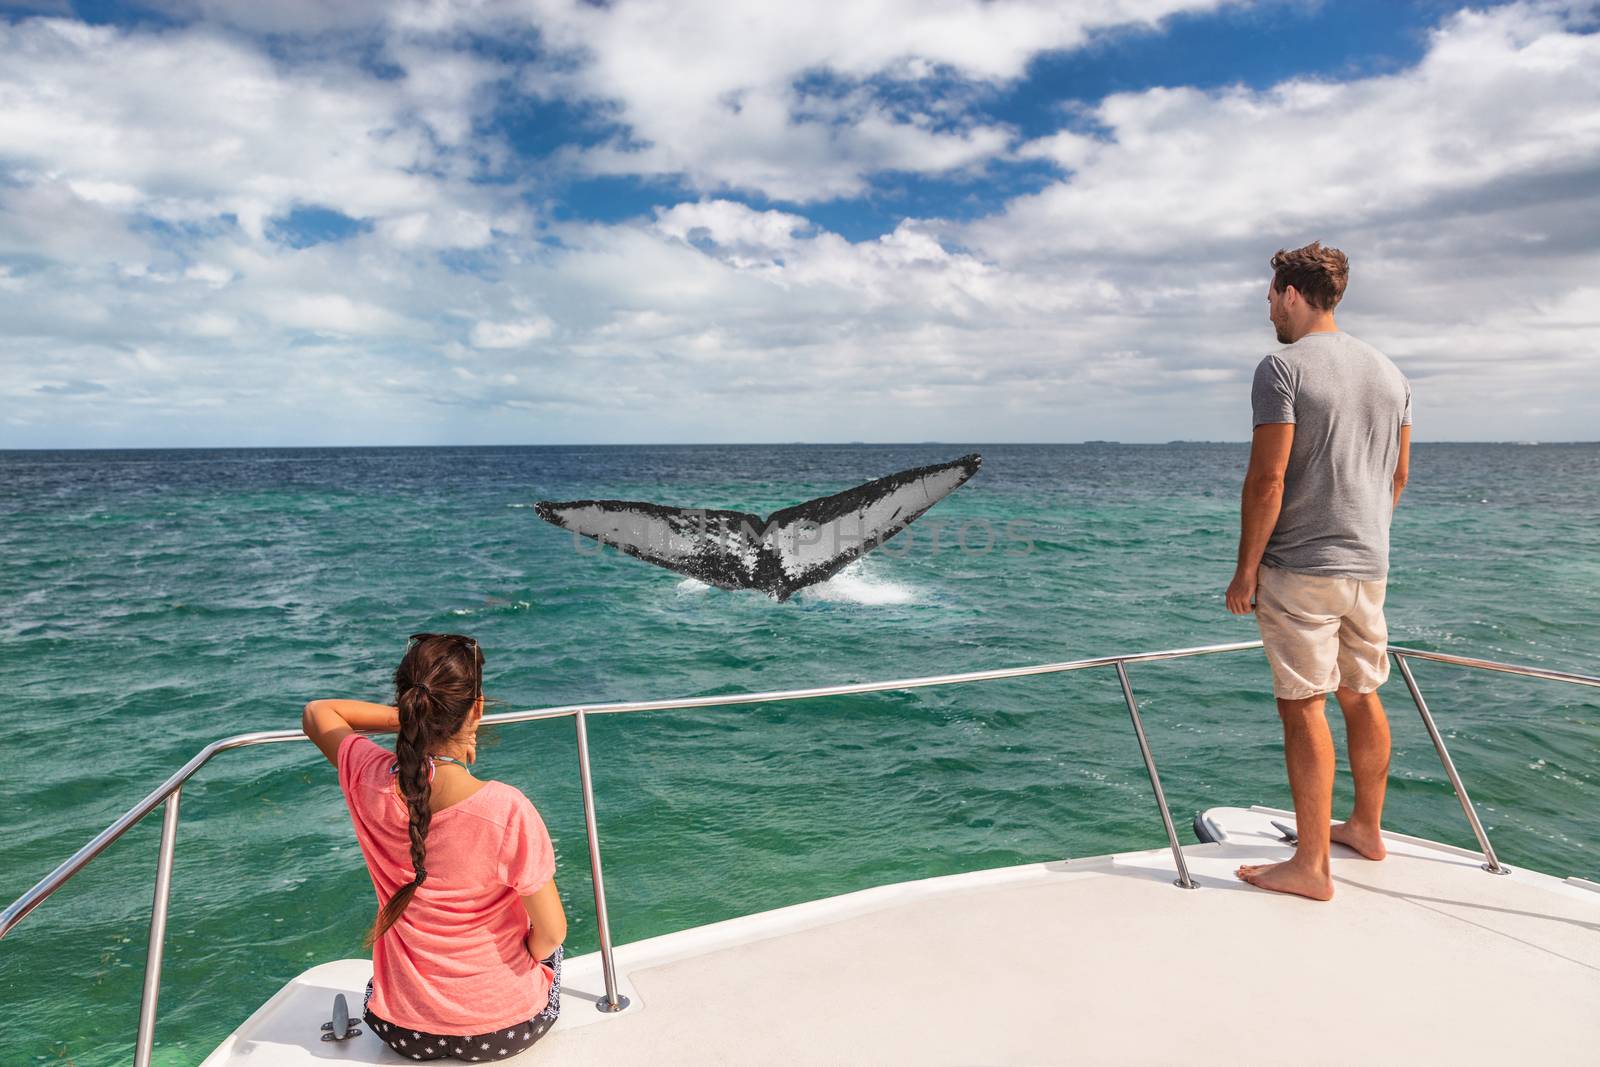 Whale watching boat tour tourists people on ship looking at humpback tail breaching ocean in tropical destination, summer travel vacation. Couple on deck of catamaran by Maridav